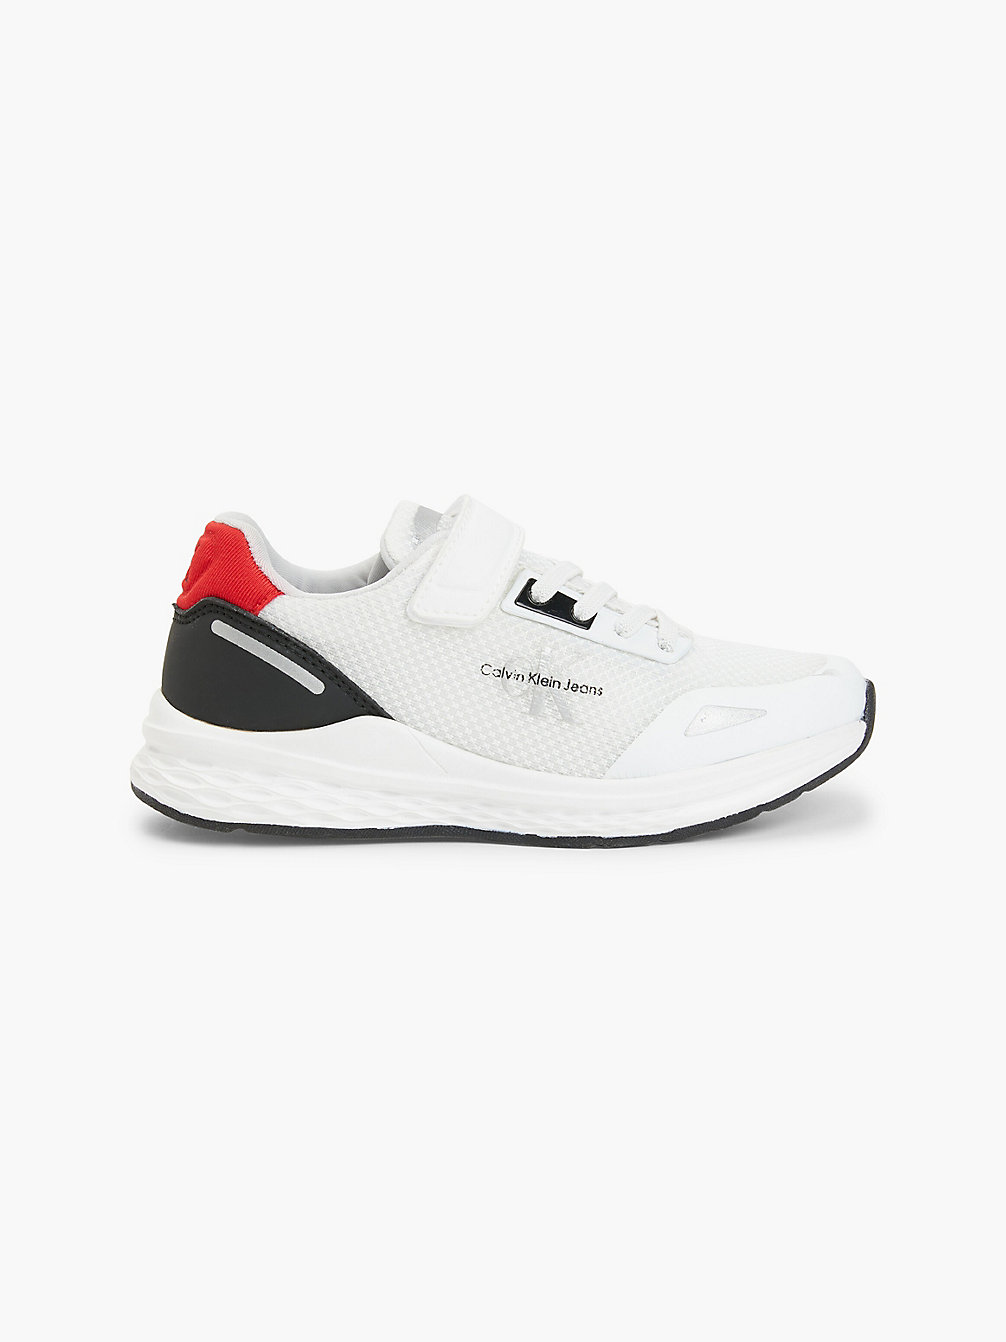 WHITE/RED Mesh Trainers undefined boys Calvin Klein